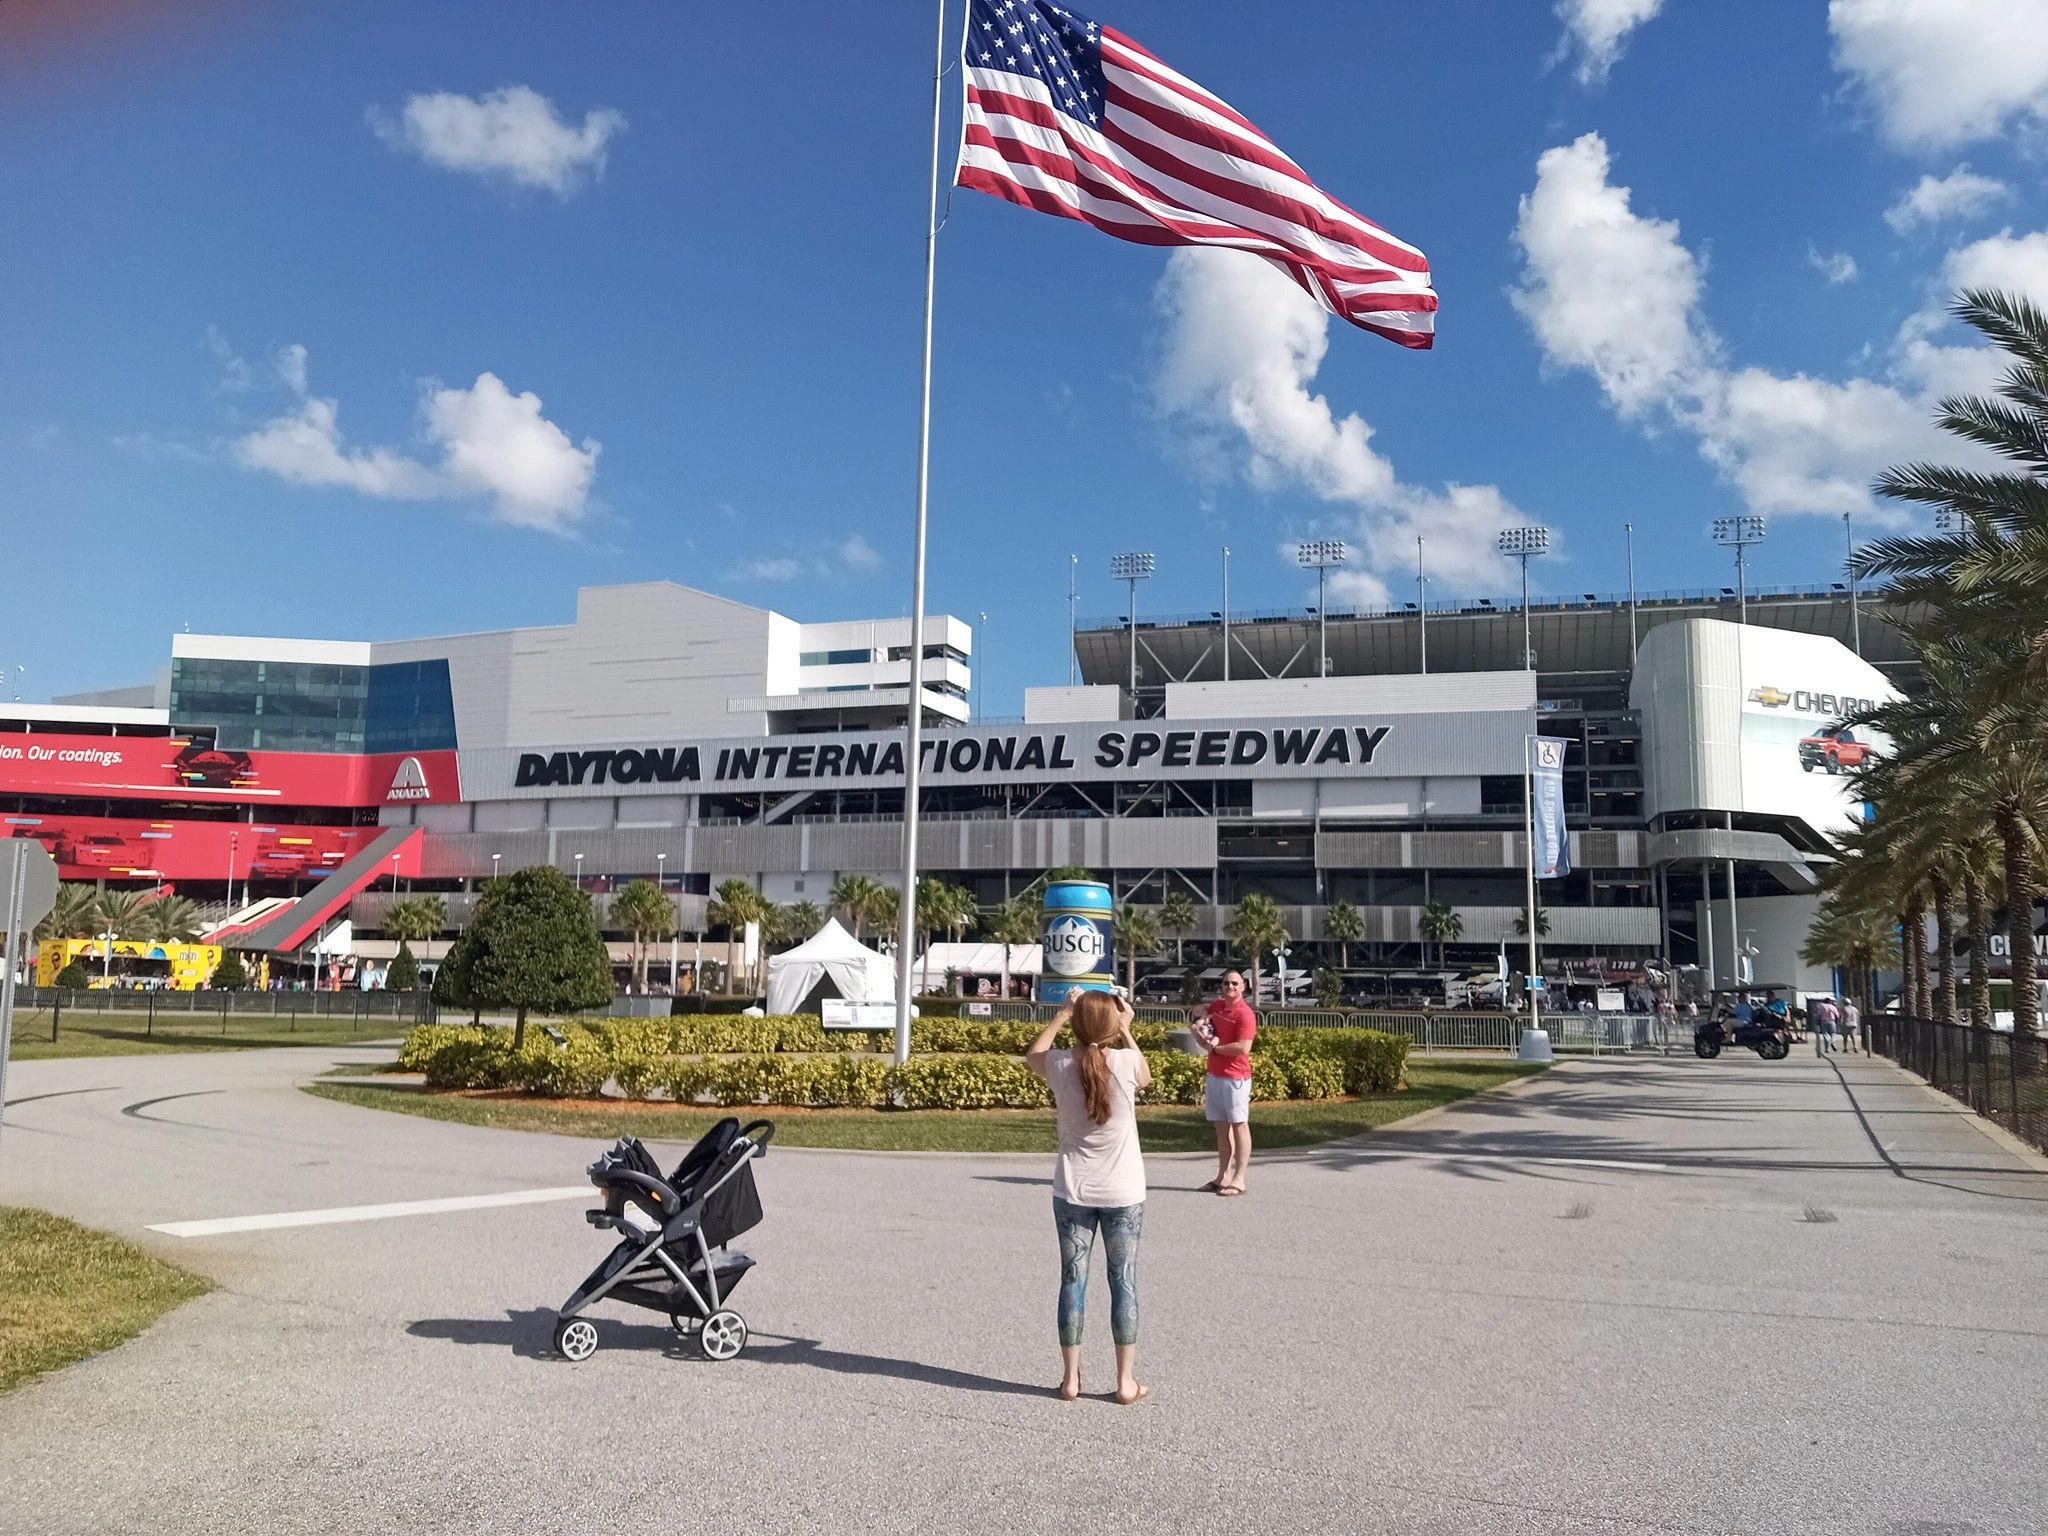 View from the front of the Daytona International Speedway in 2022 just before the Daytona 500